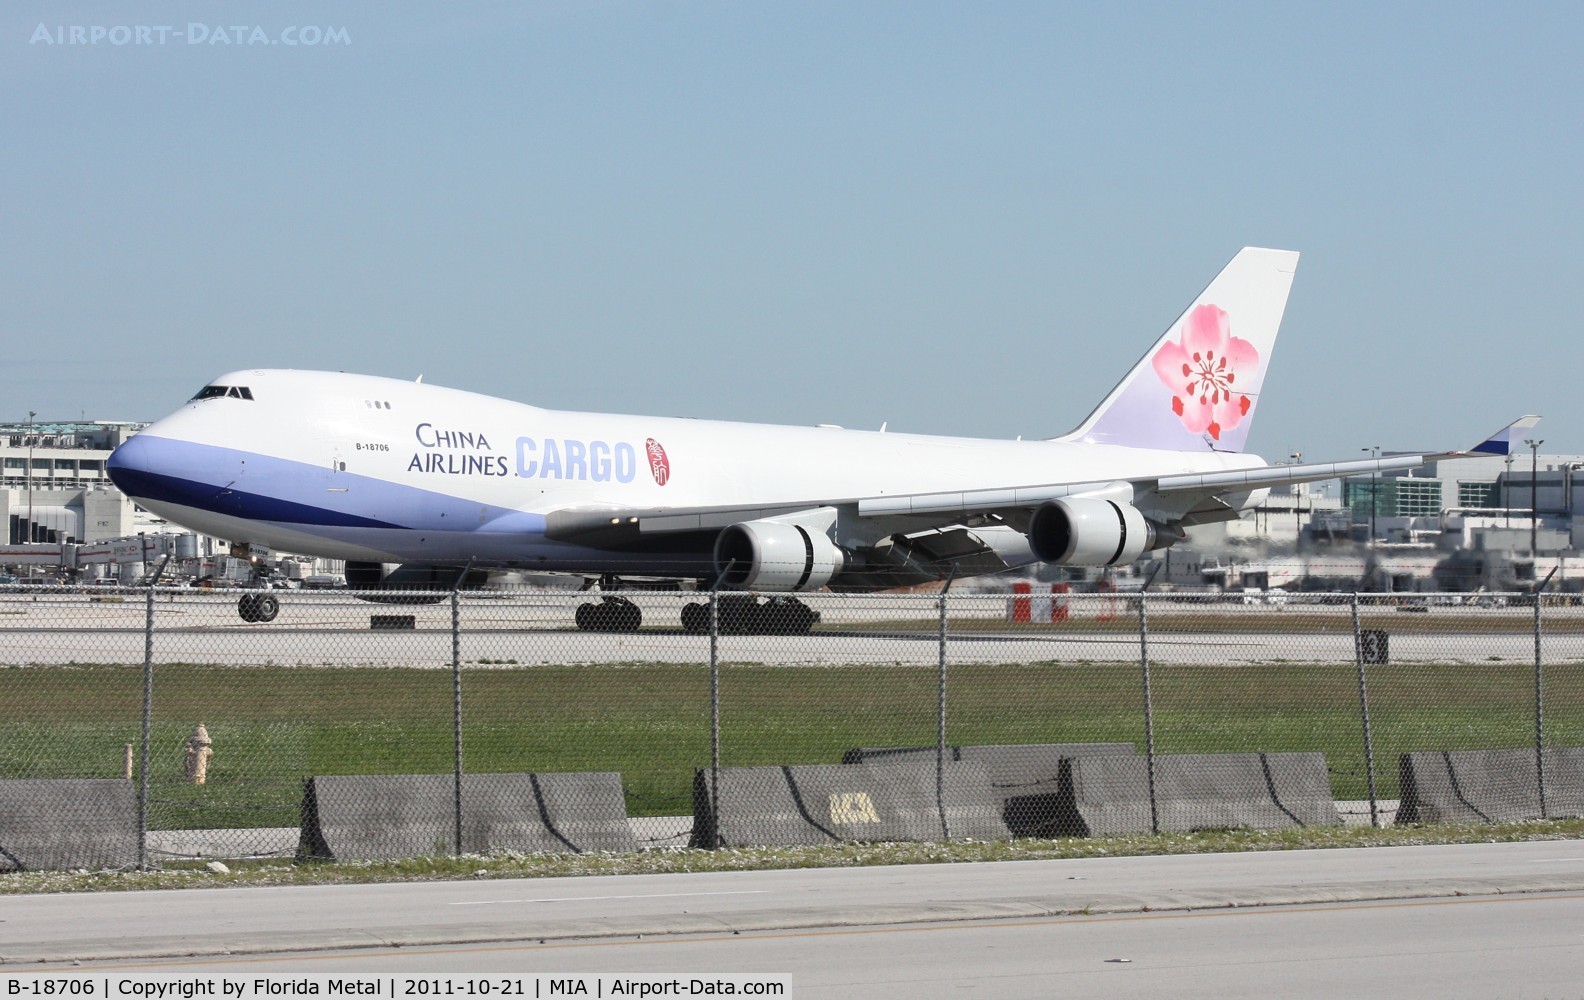 B-18706, 2001 Boeing 747-409F/SCD C/N 30763, China Airlines Cargo 747